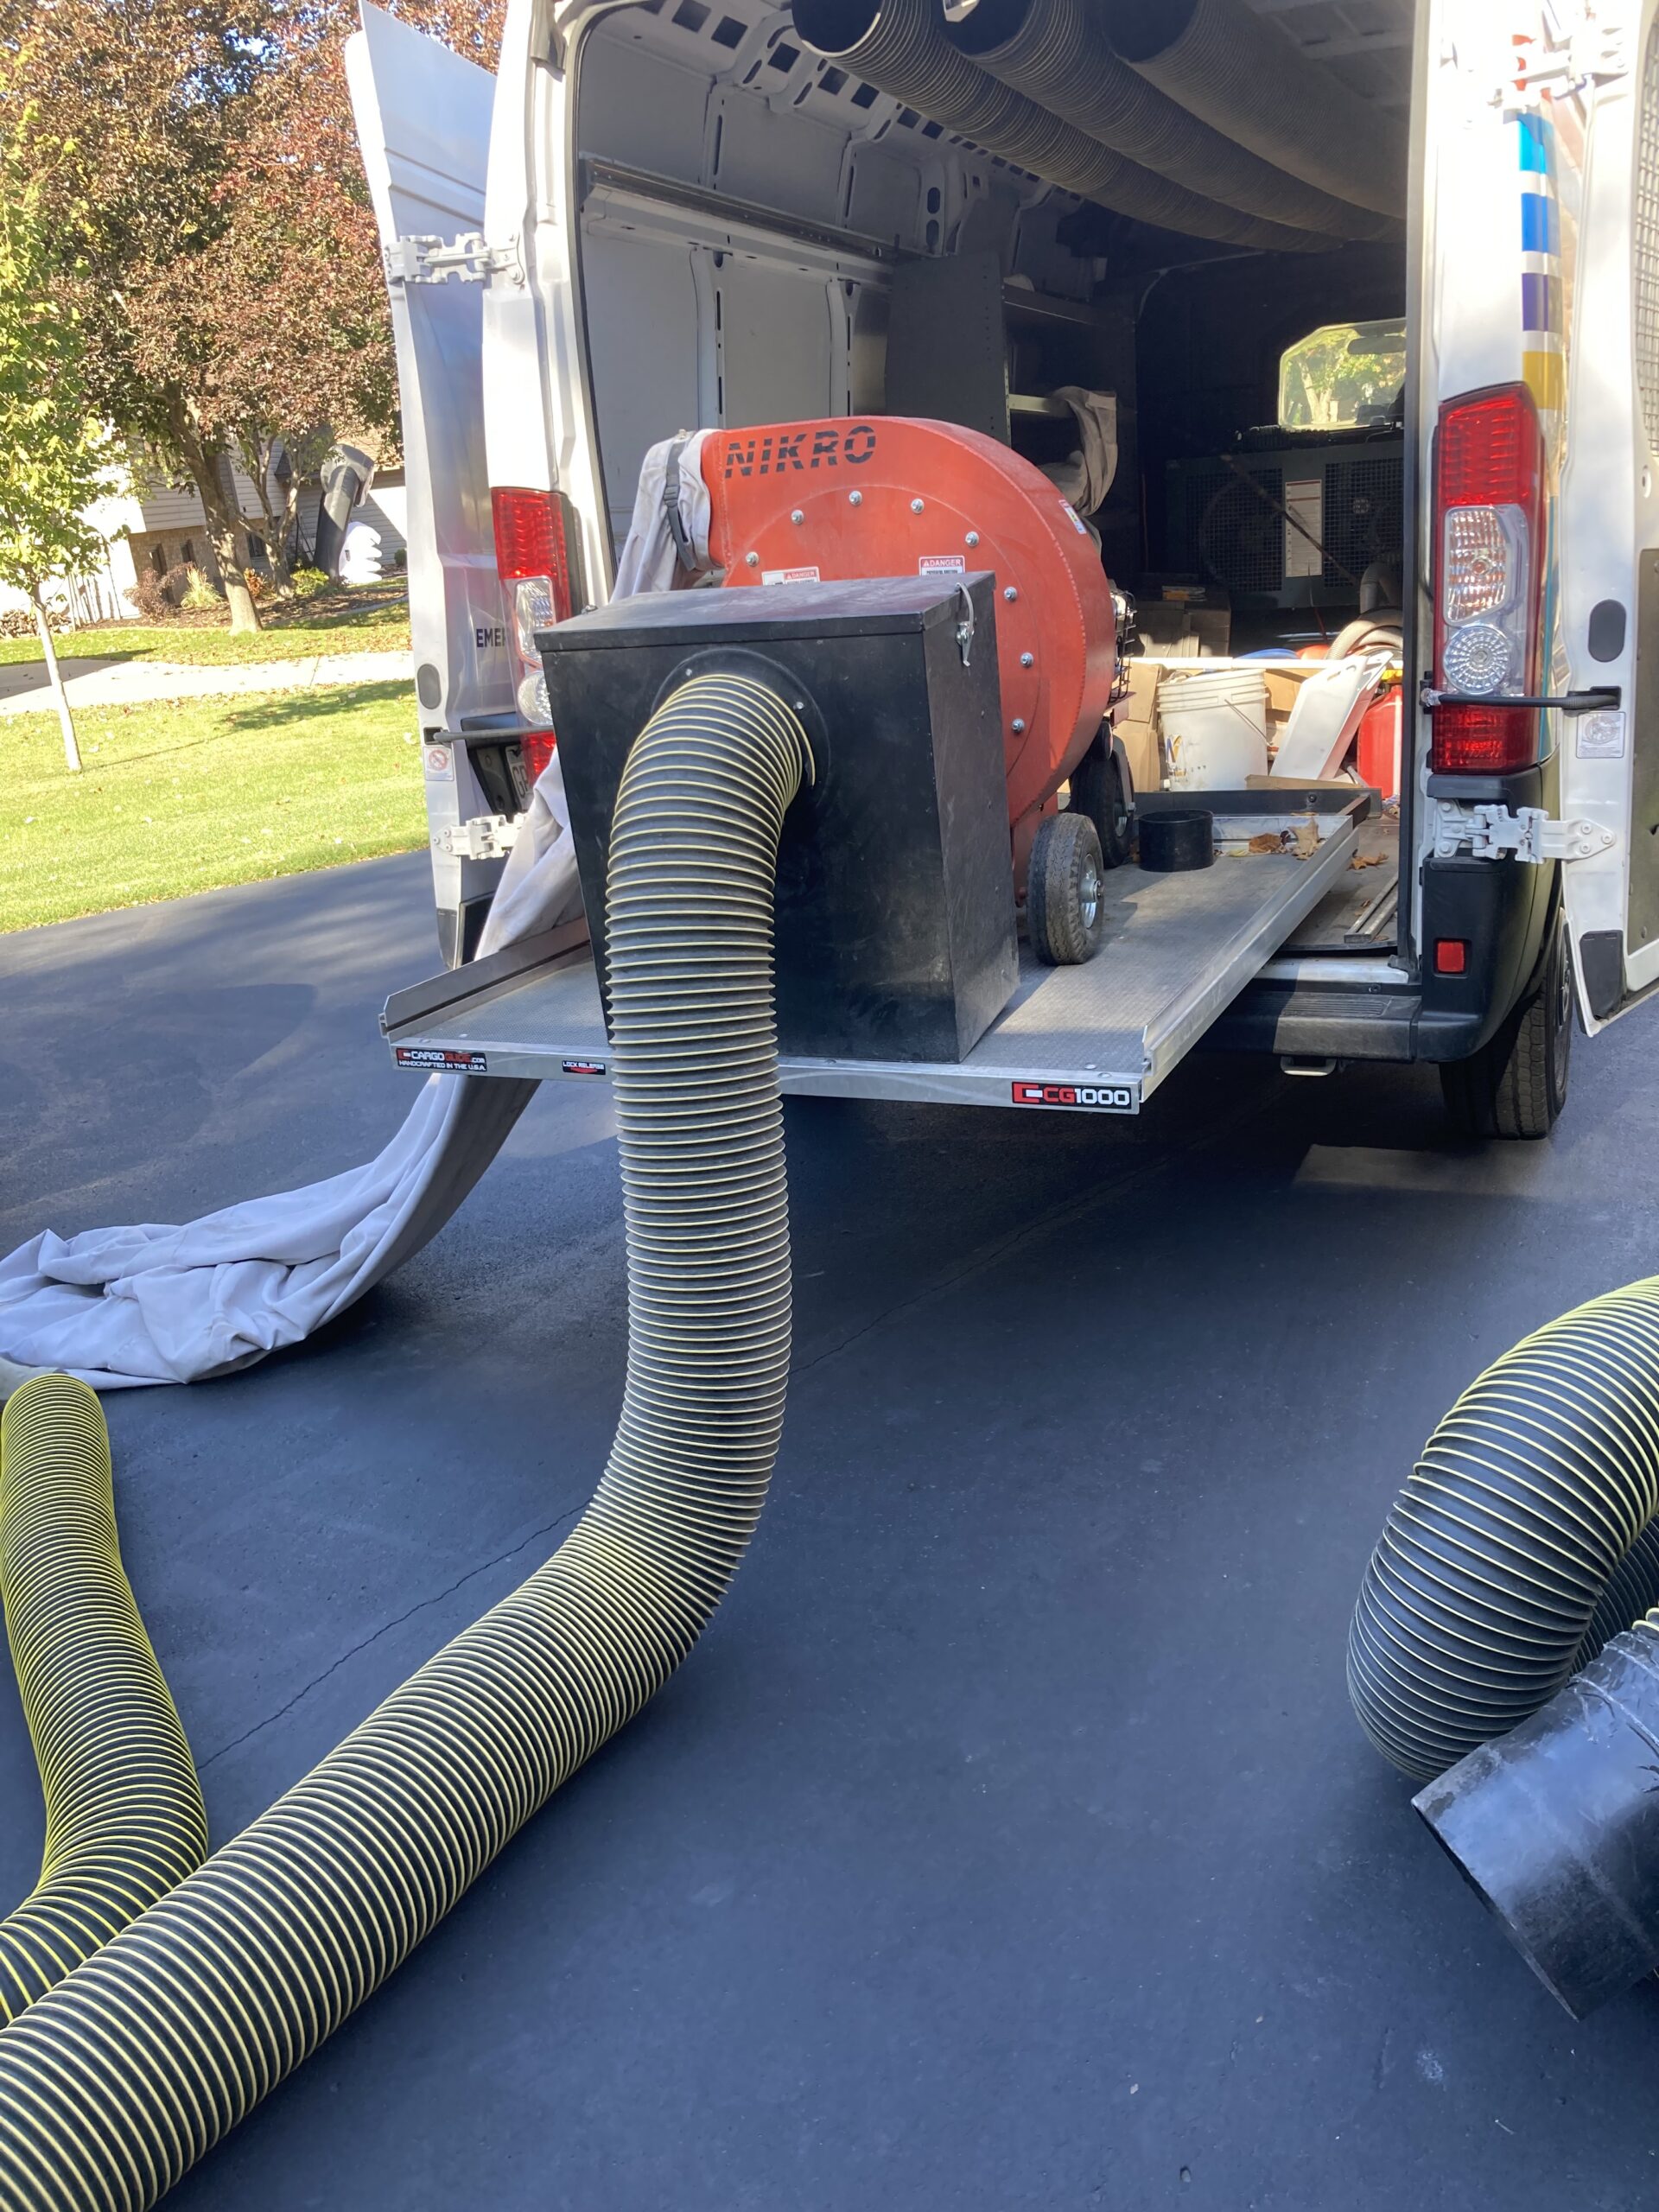 Dryer Duct Cleaning Fremont